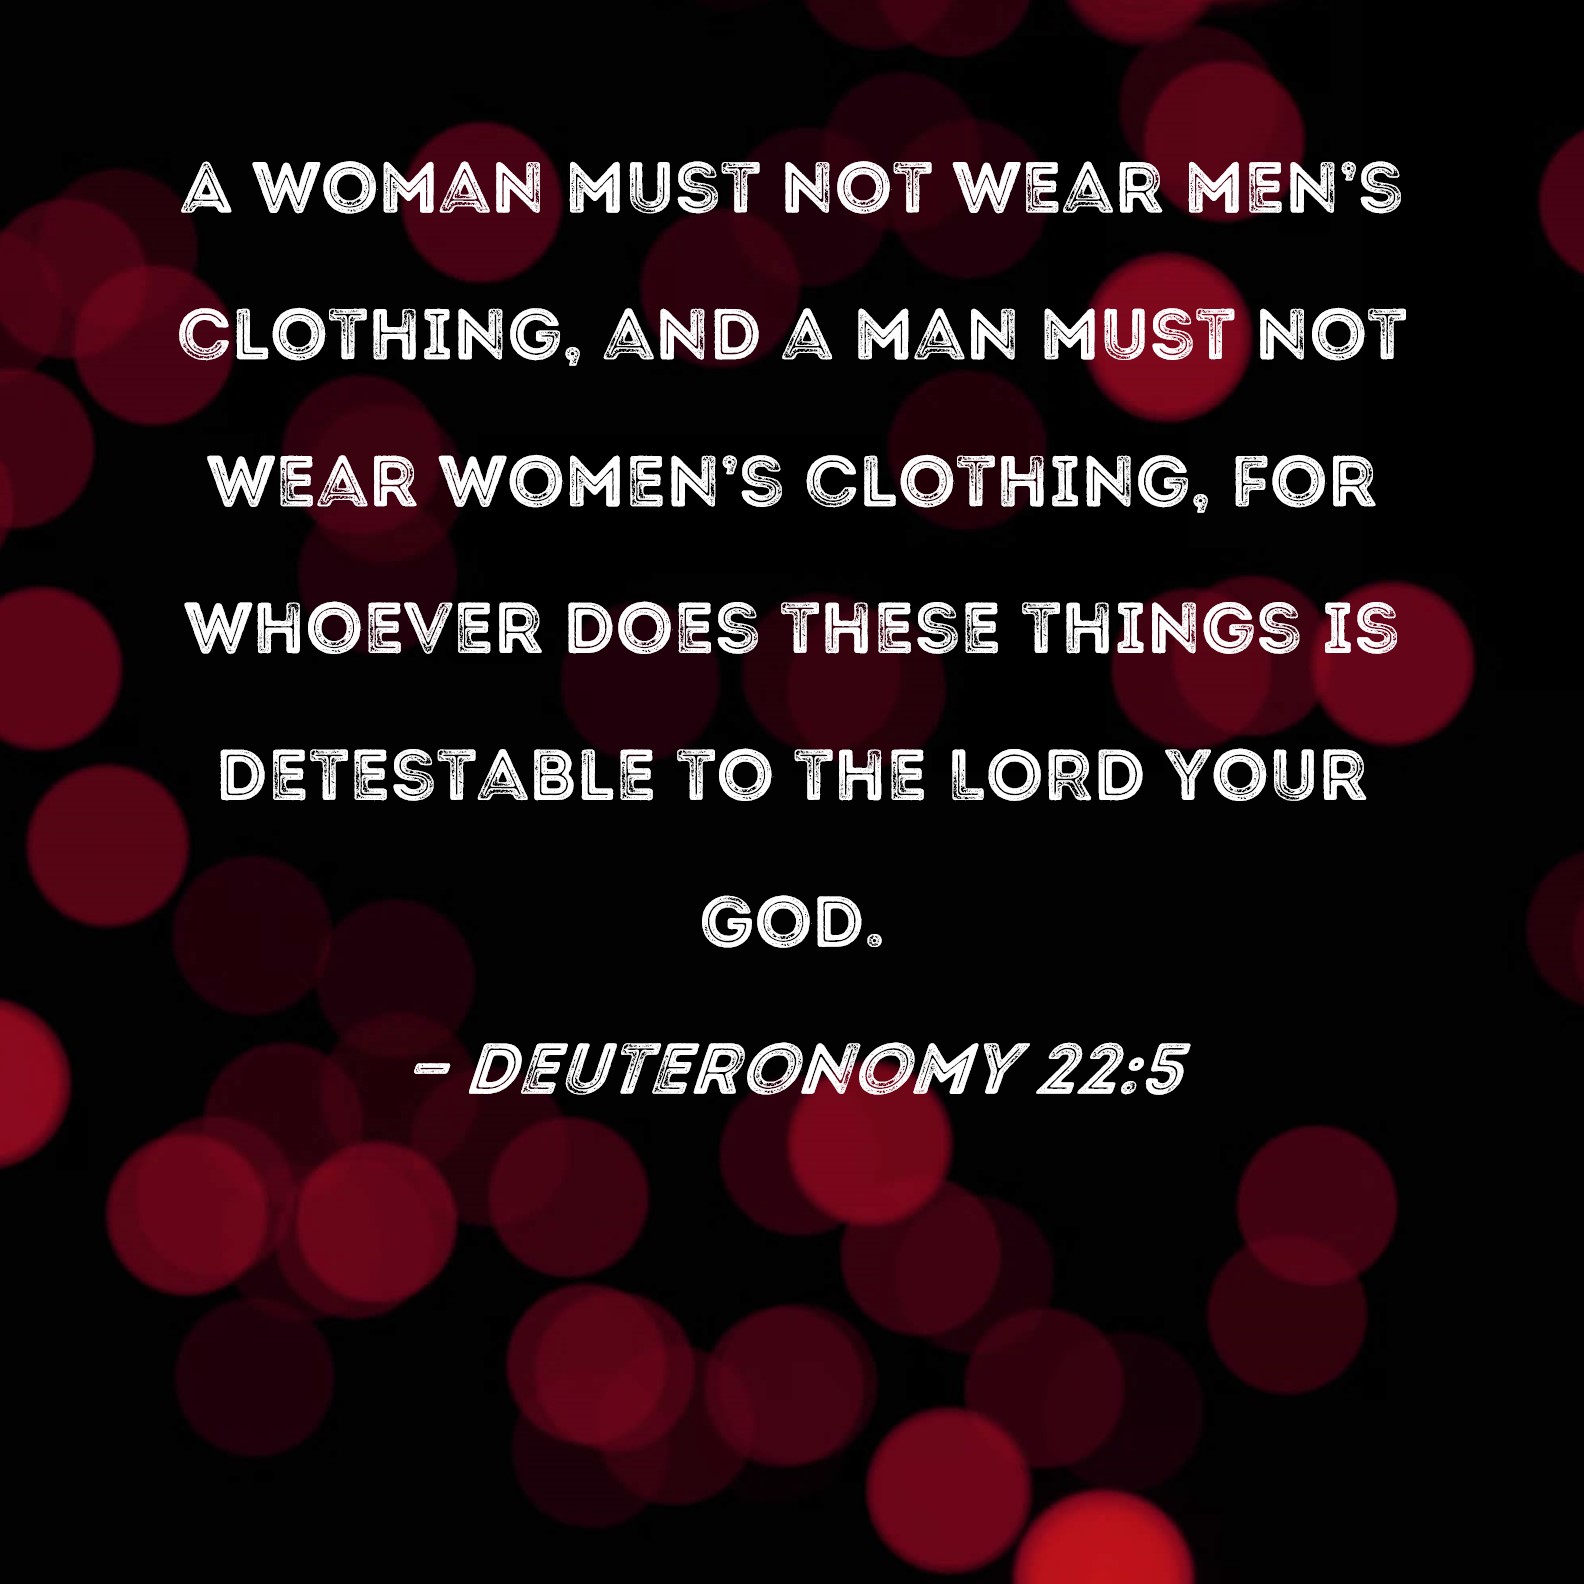 Deuteronomy 22:5 A woman must not wear men's clothing, and a man must not  wear women's clothing, for whoever does these things is detestable to the  LORD your God.